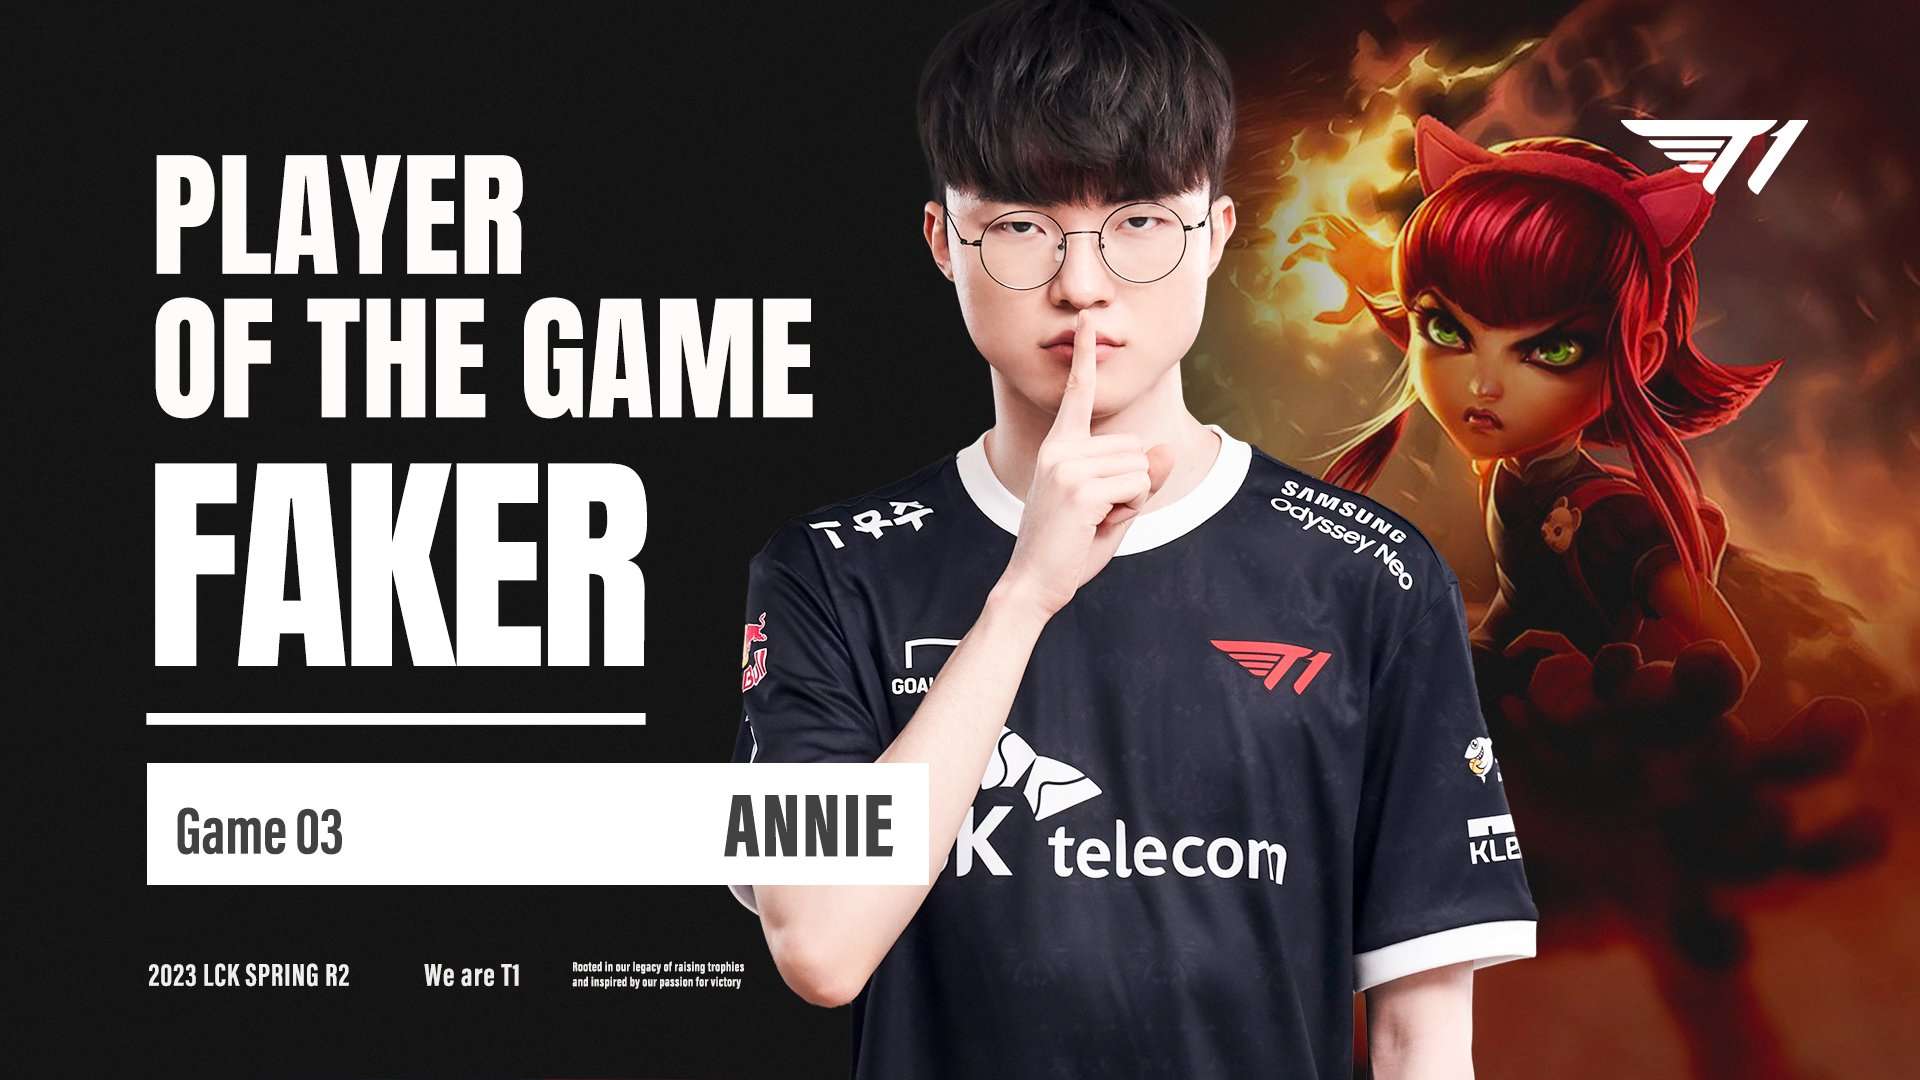 T1 defeated GEN after Peanut’s fatal mistake in LCK Spring 2023